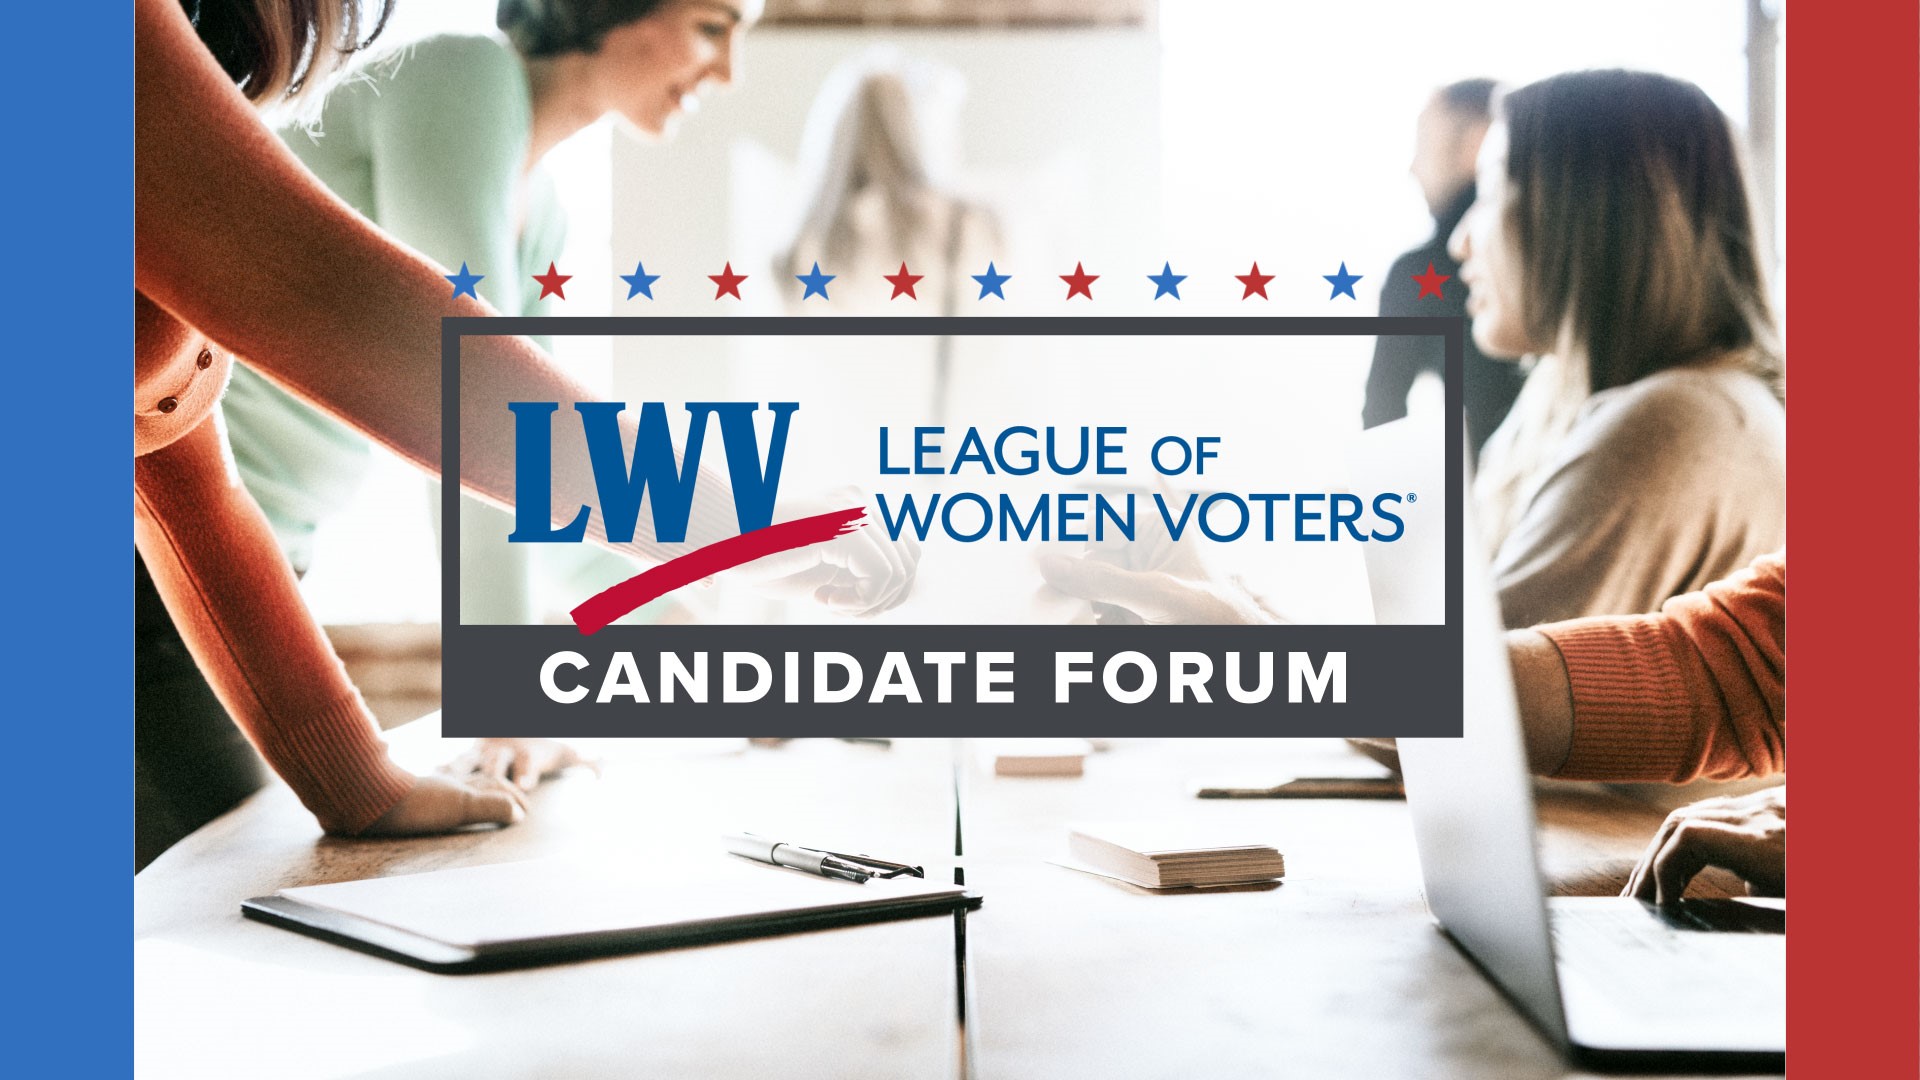 KIII-TV has partnered with the League of Women Voters-Corpus Christi to help make sure our community has the information they need before hitting the polls Nov. 3.